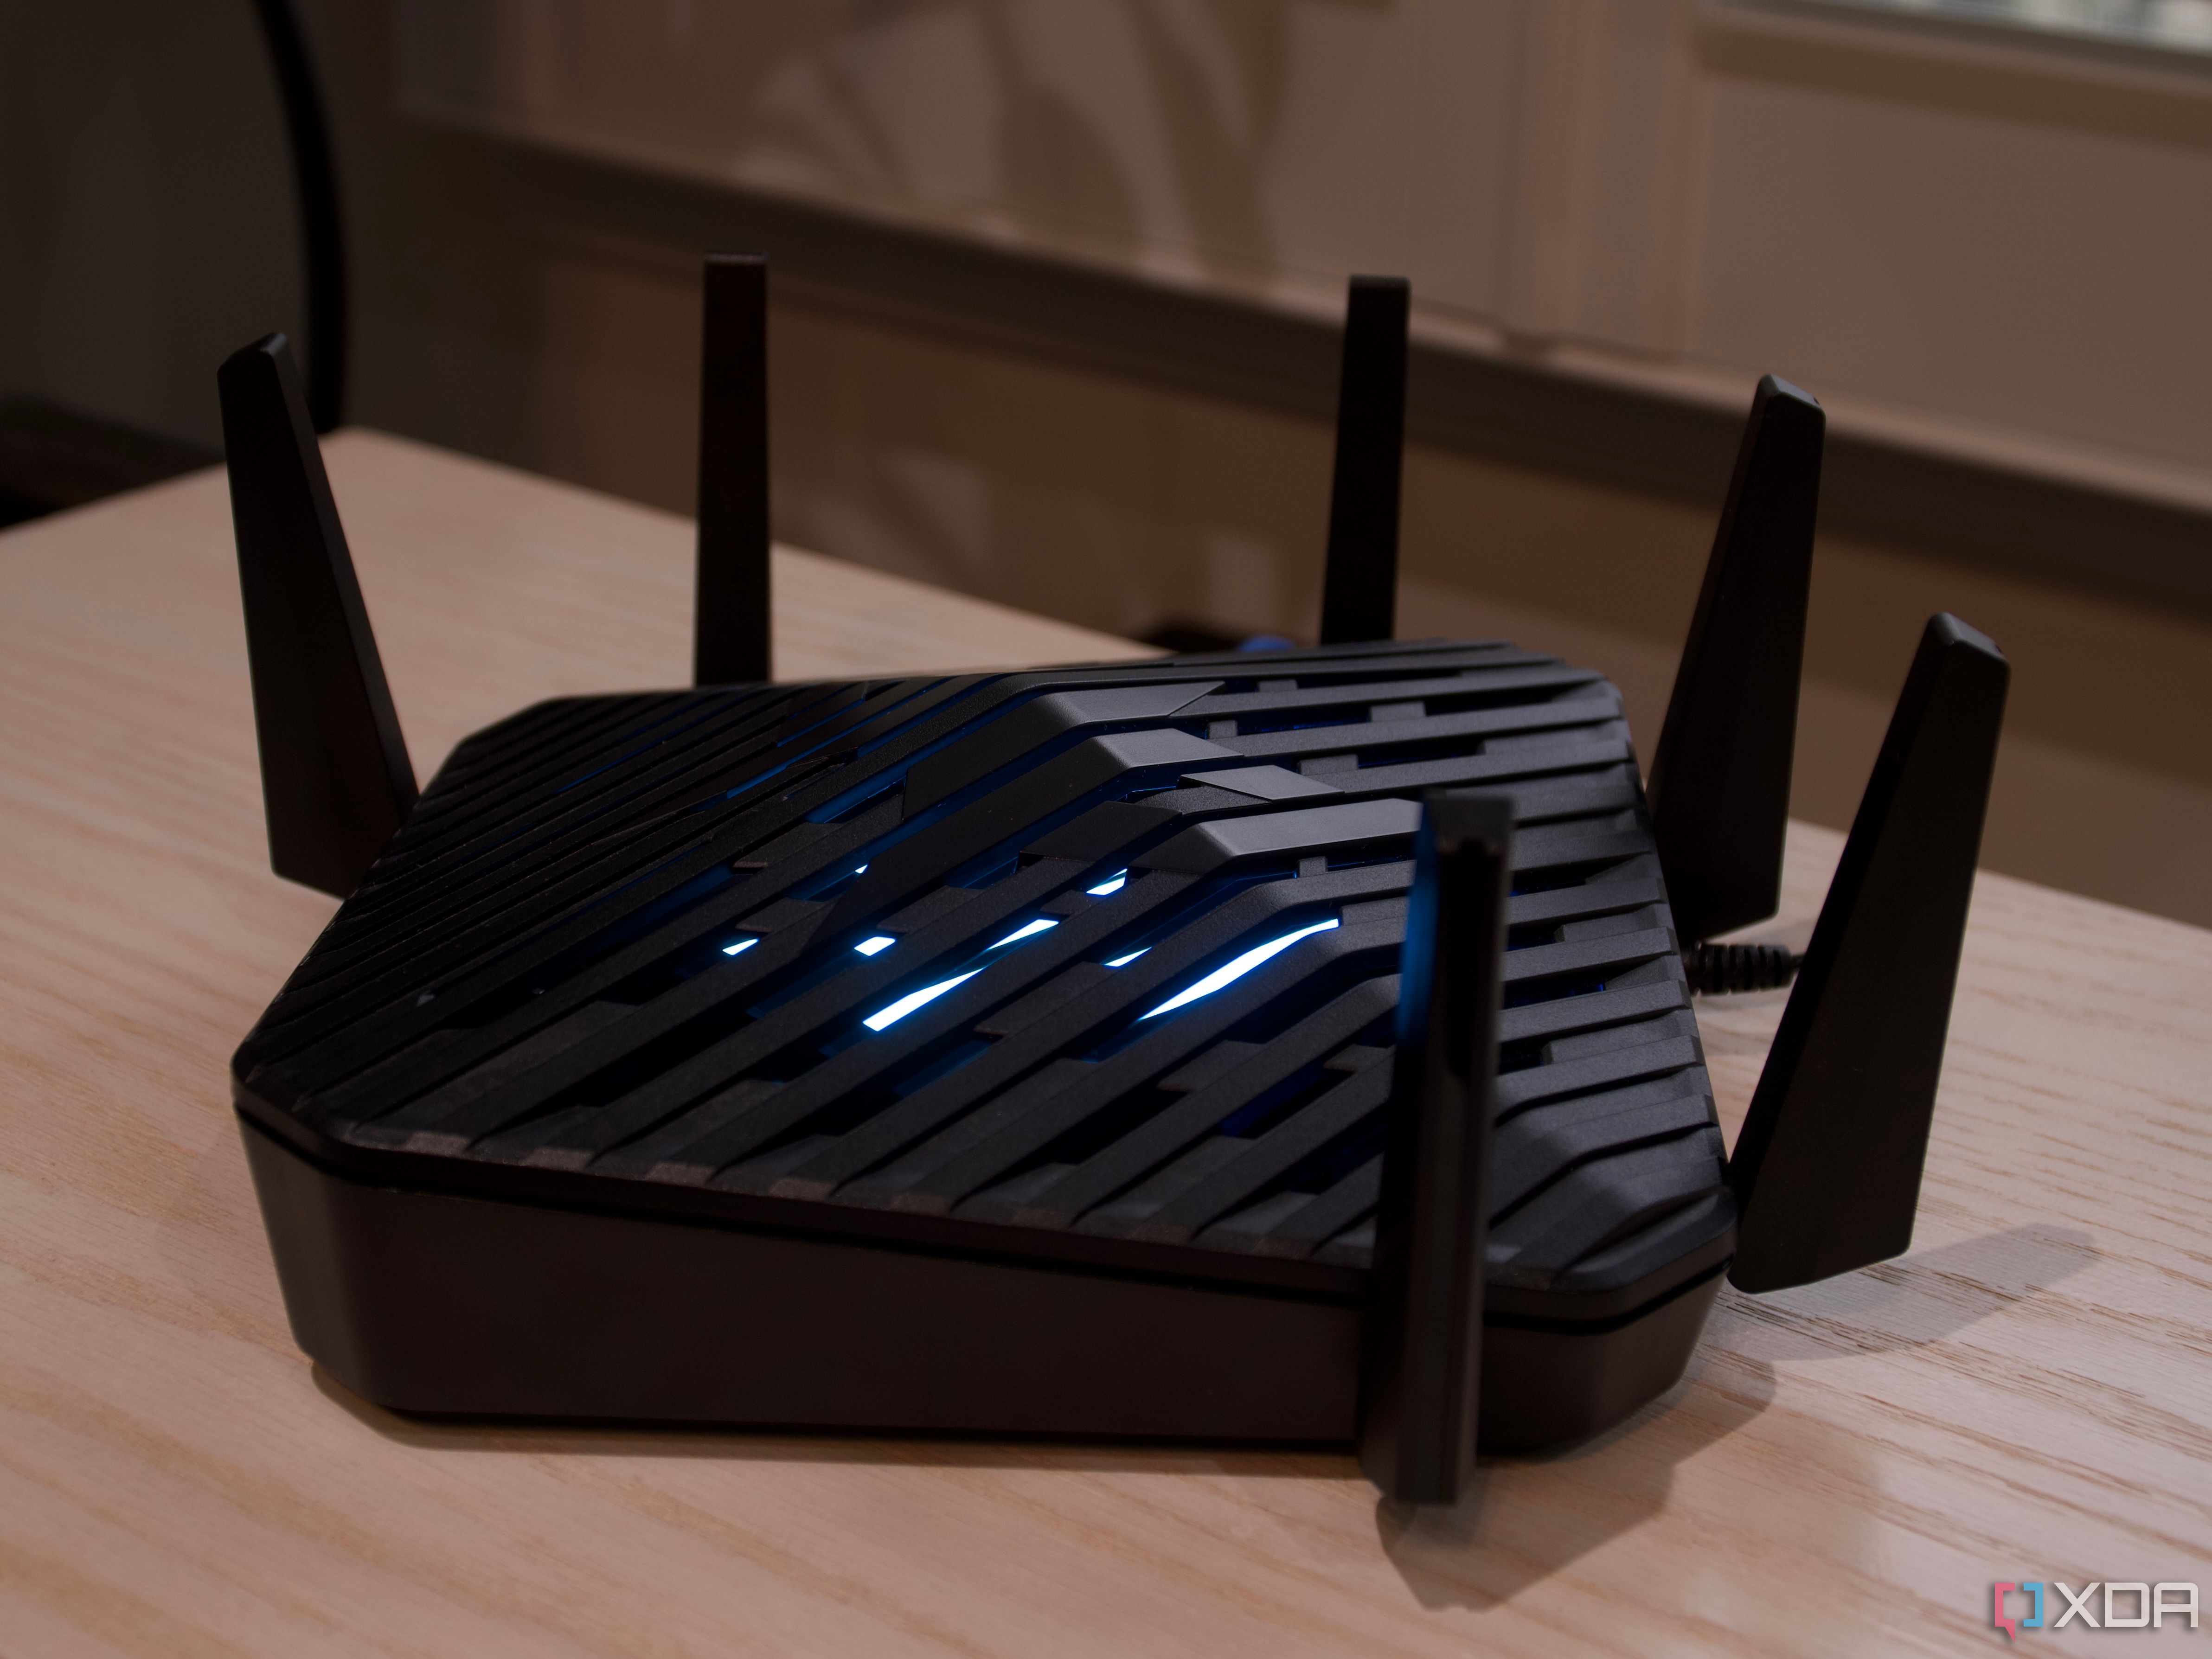 What's the difference between a modem and a router?